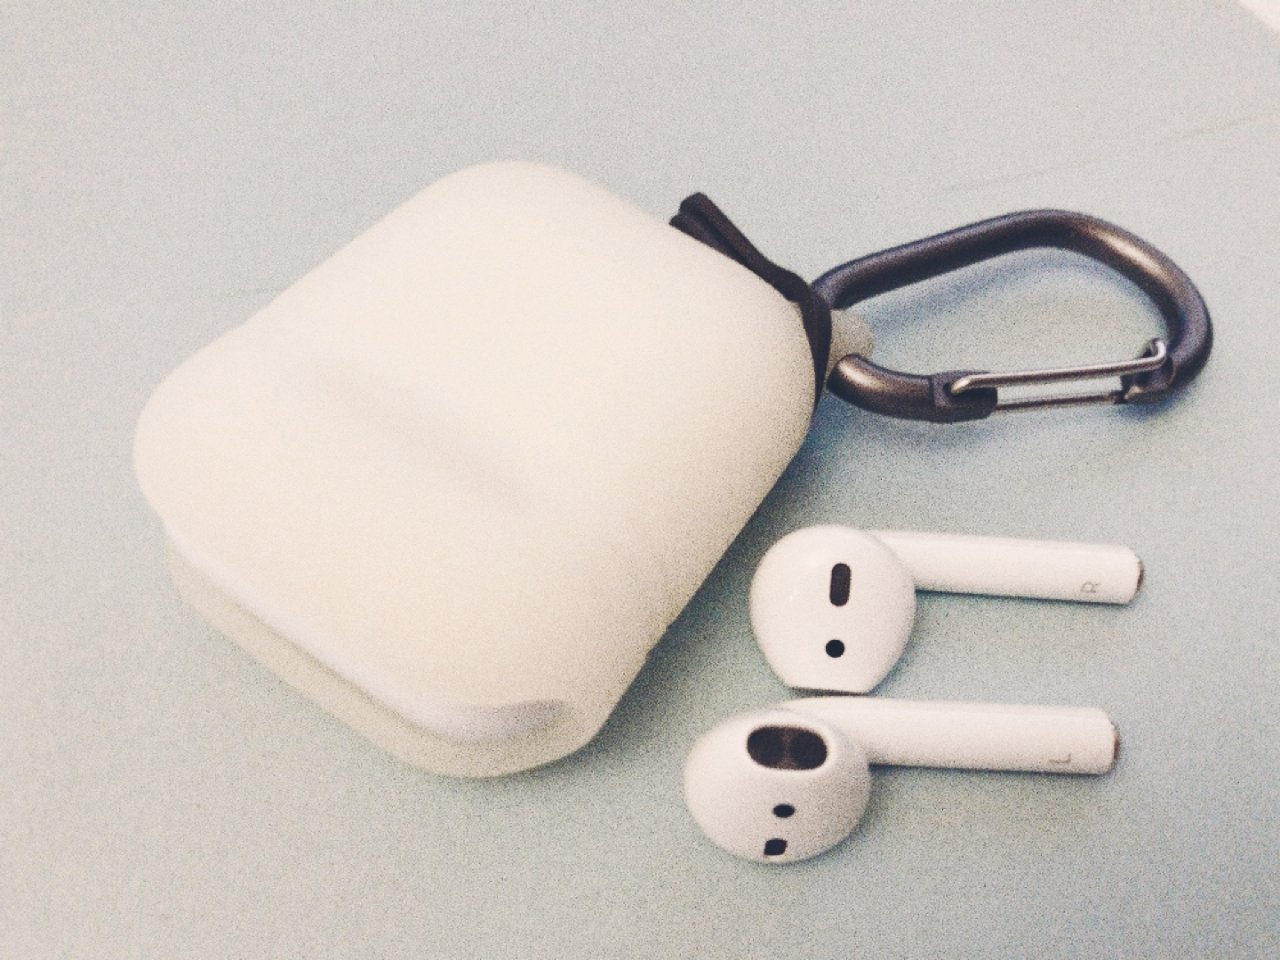 Airpods 轻松配对台式机当麦克风...